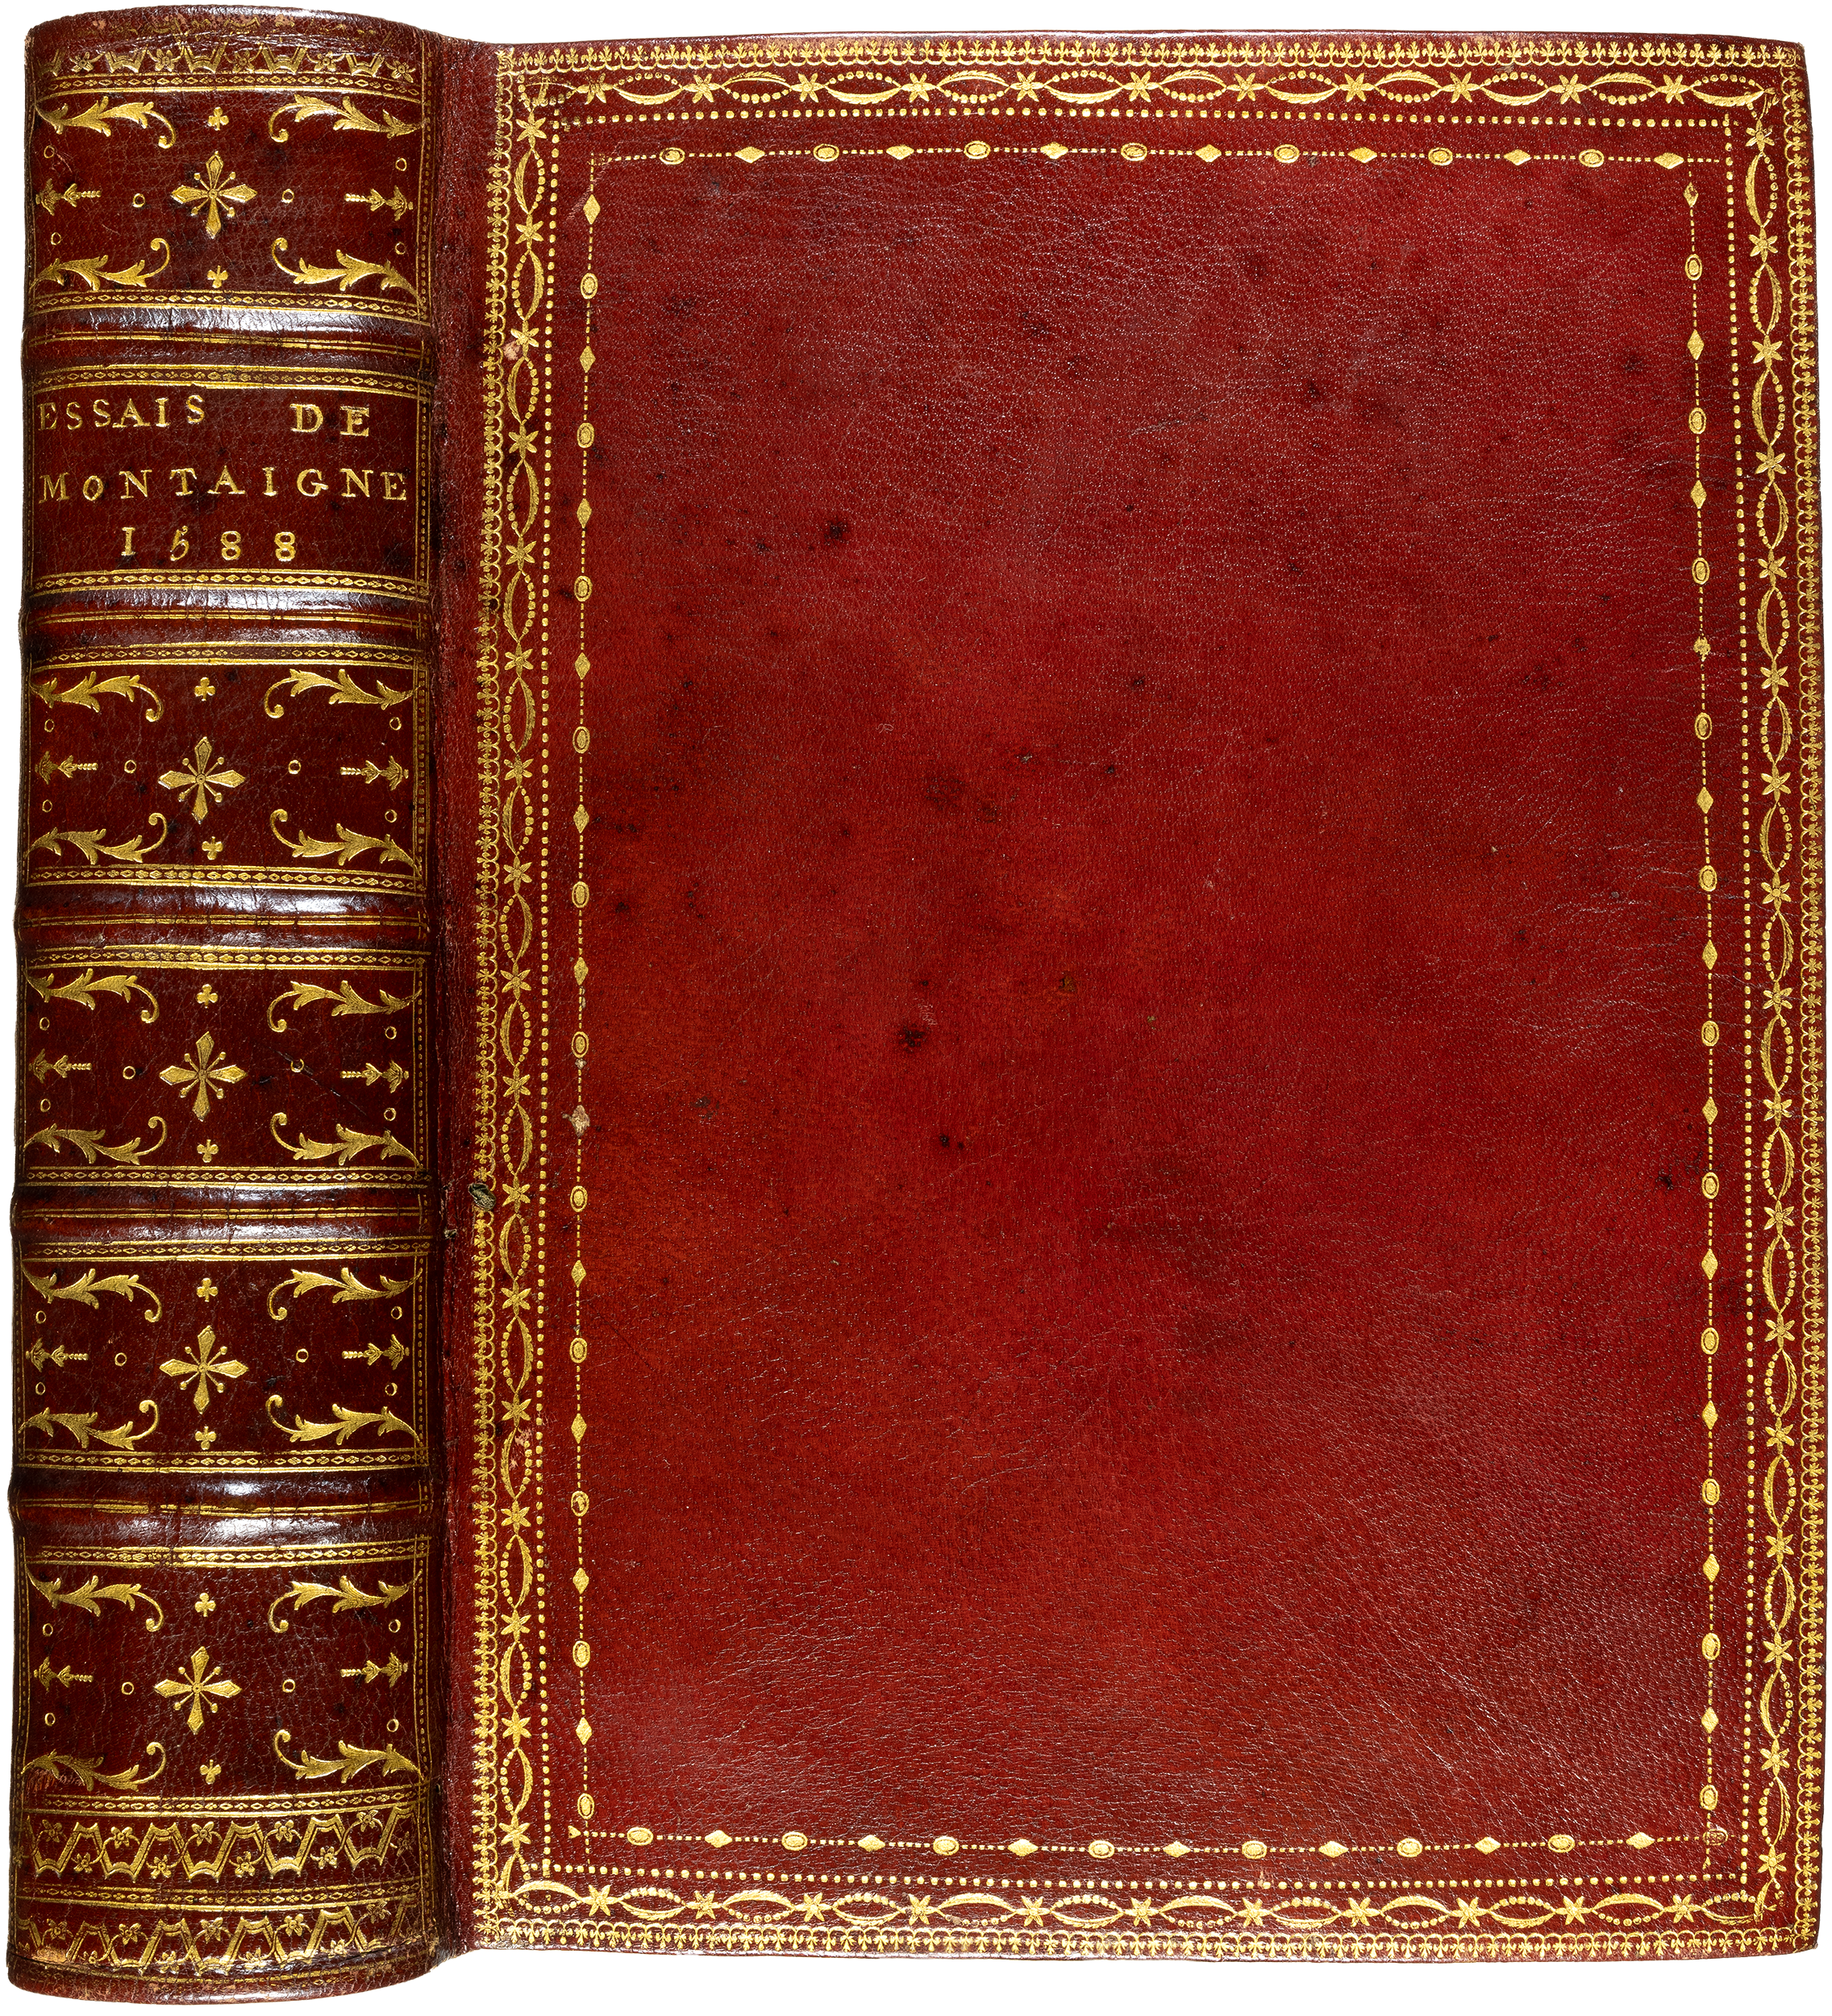 montaigne-essais-1588-first-complete-edition-red-morocco-binding-bradel.png